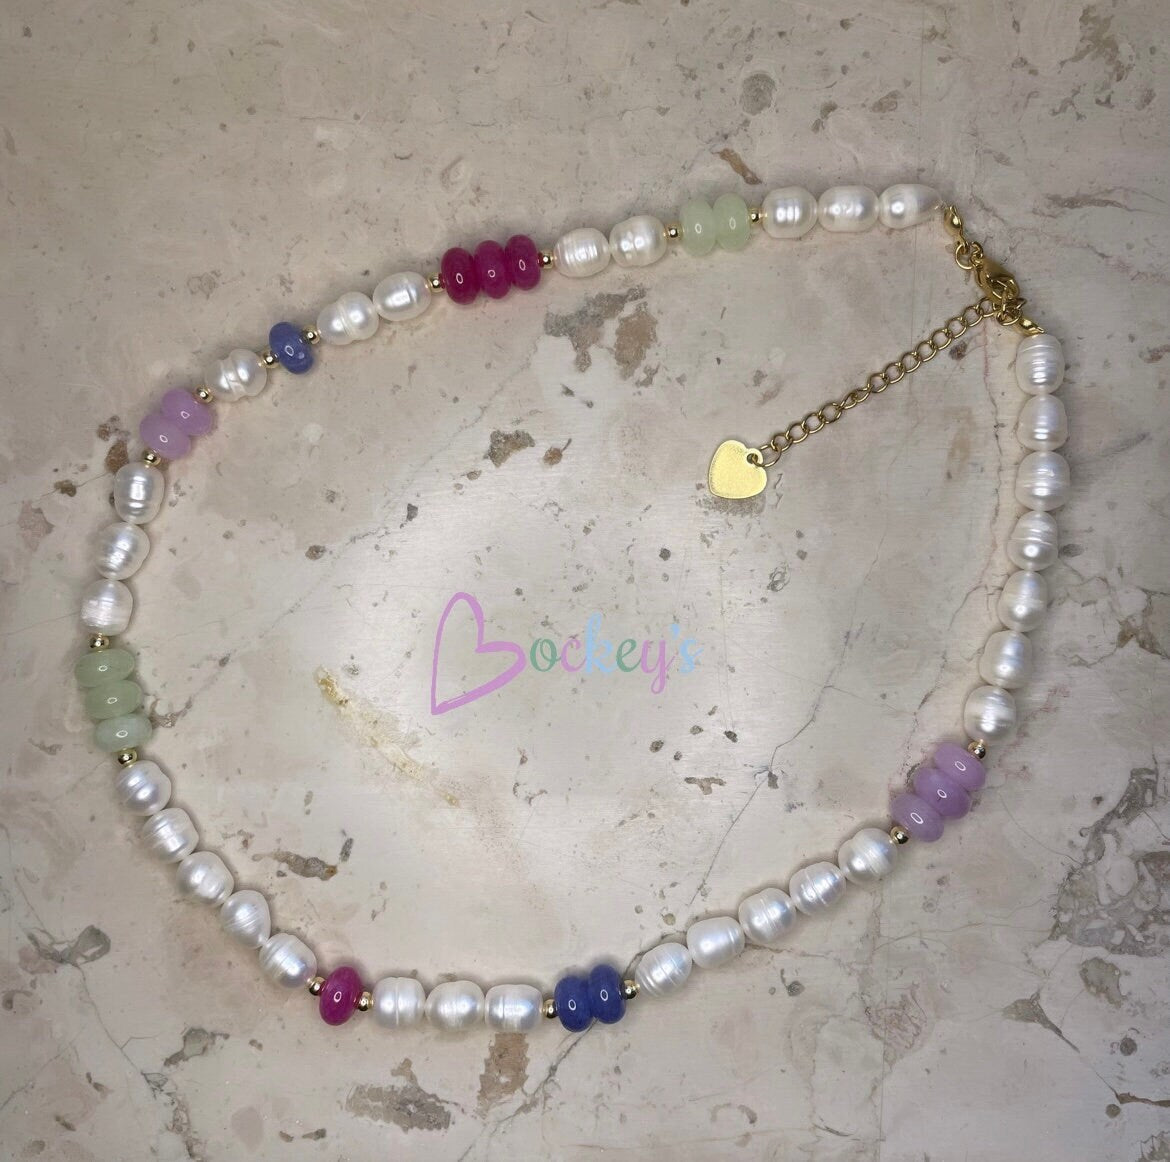 Colorful natural freshwater pearl necklace with natural rondelle stones and gold-plated beads